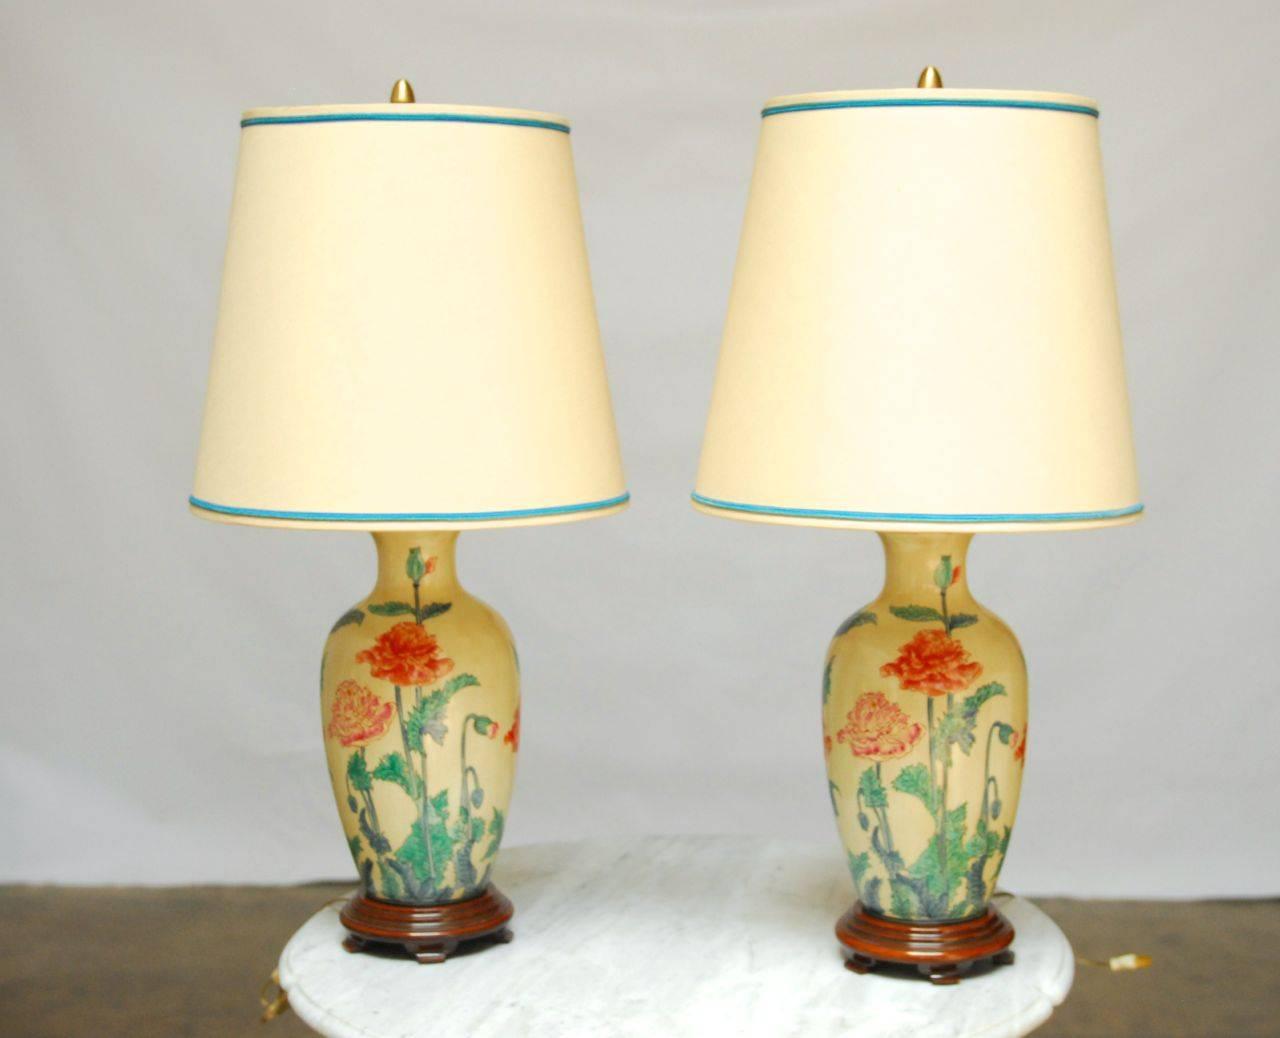 Pair of chinoiserie decorated Marbro ceramic lamps. Excellent quality European vases mounted with walnut bases. Decorated with flowering chrysanthemum blossoms, buds, and leaves. Included original matching shades and finials.